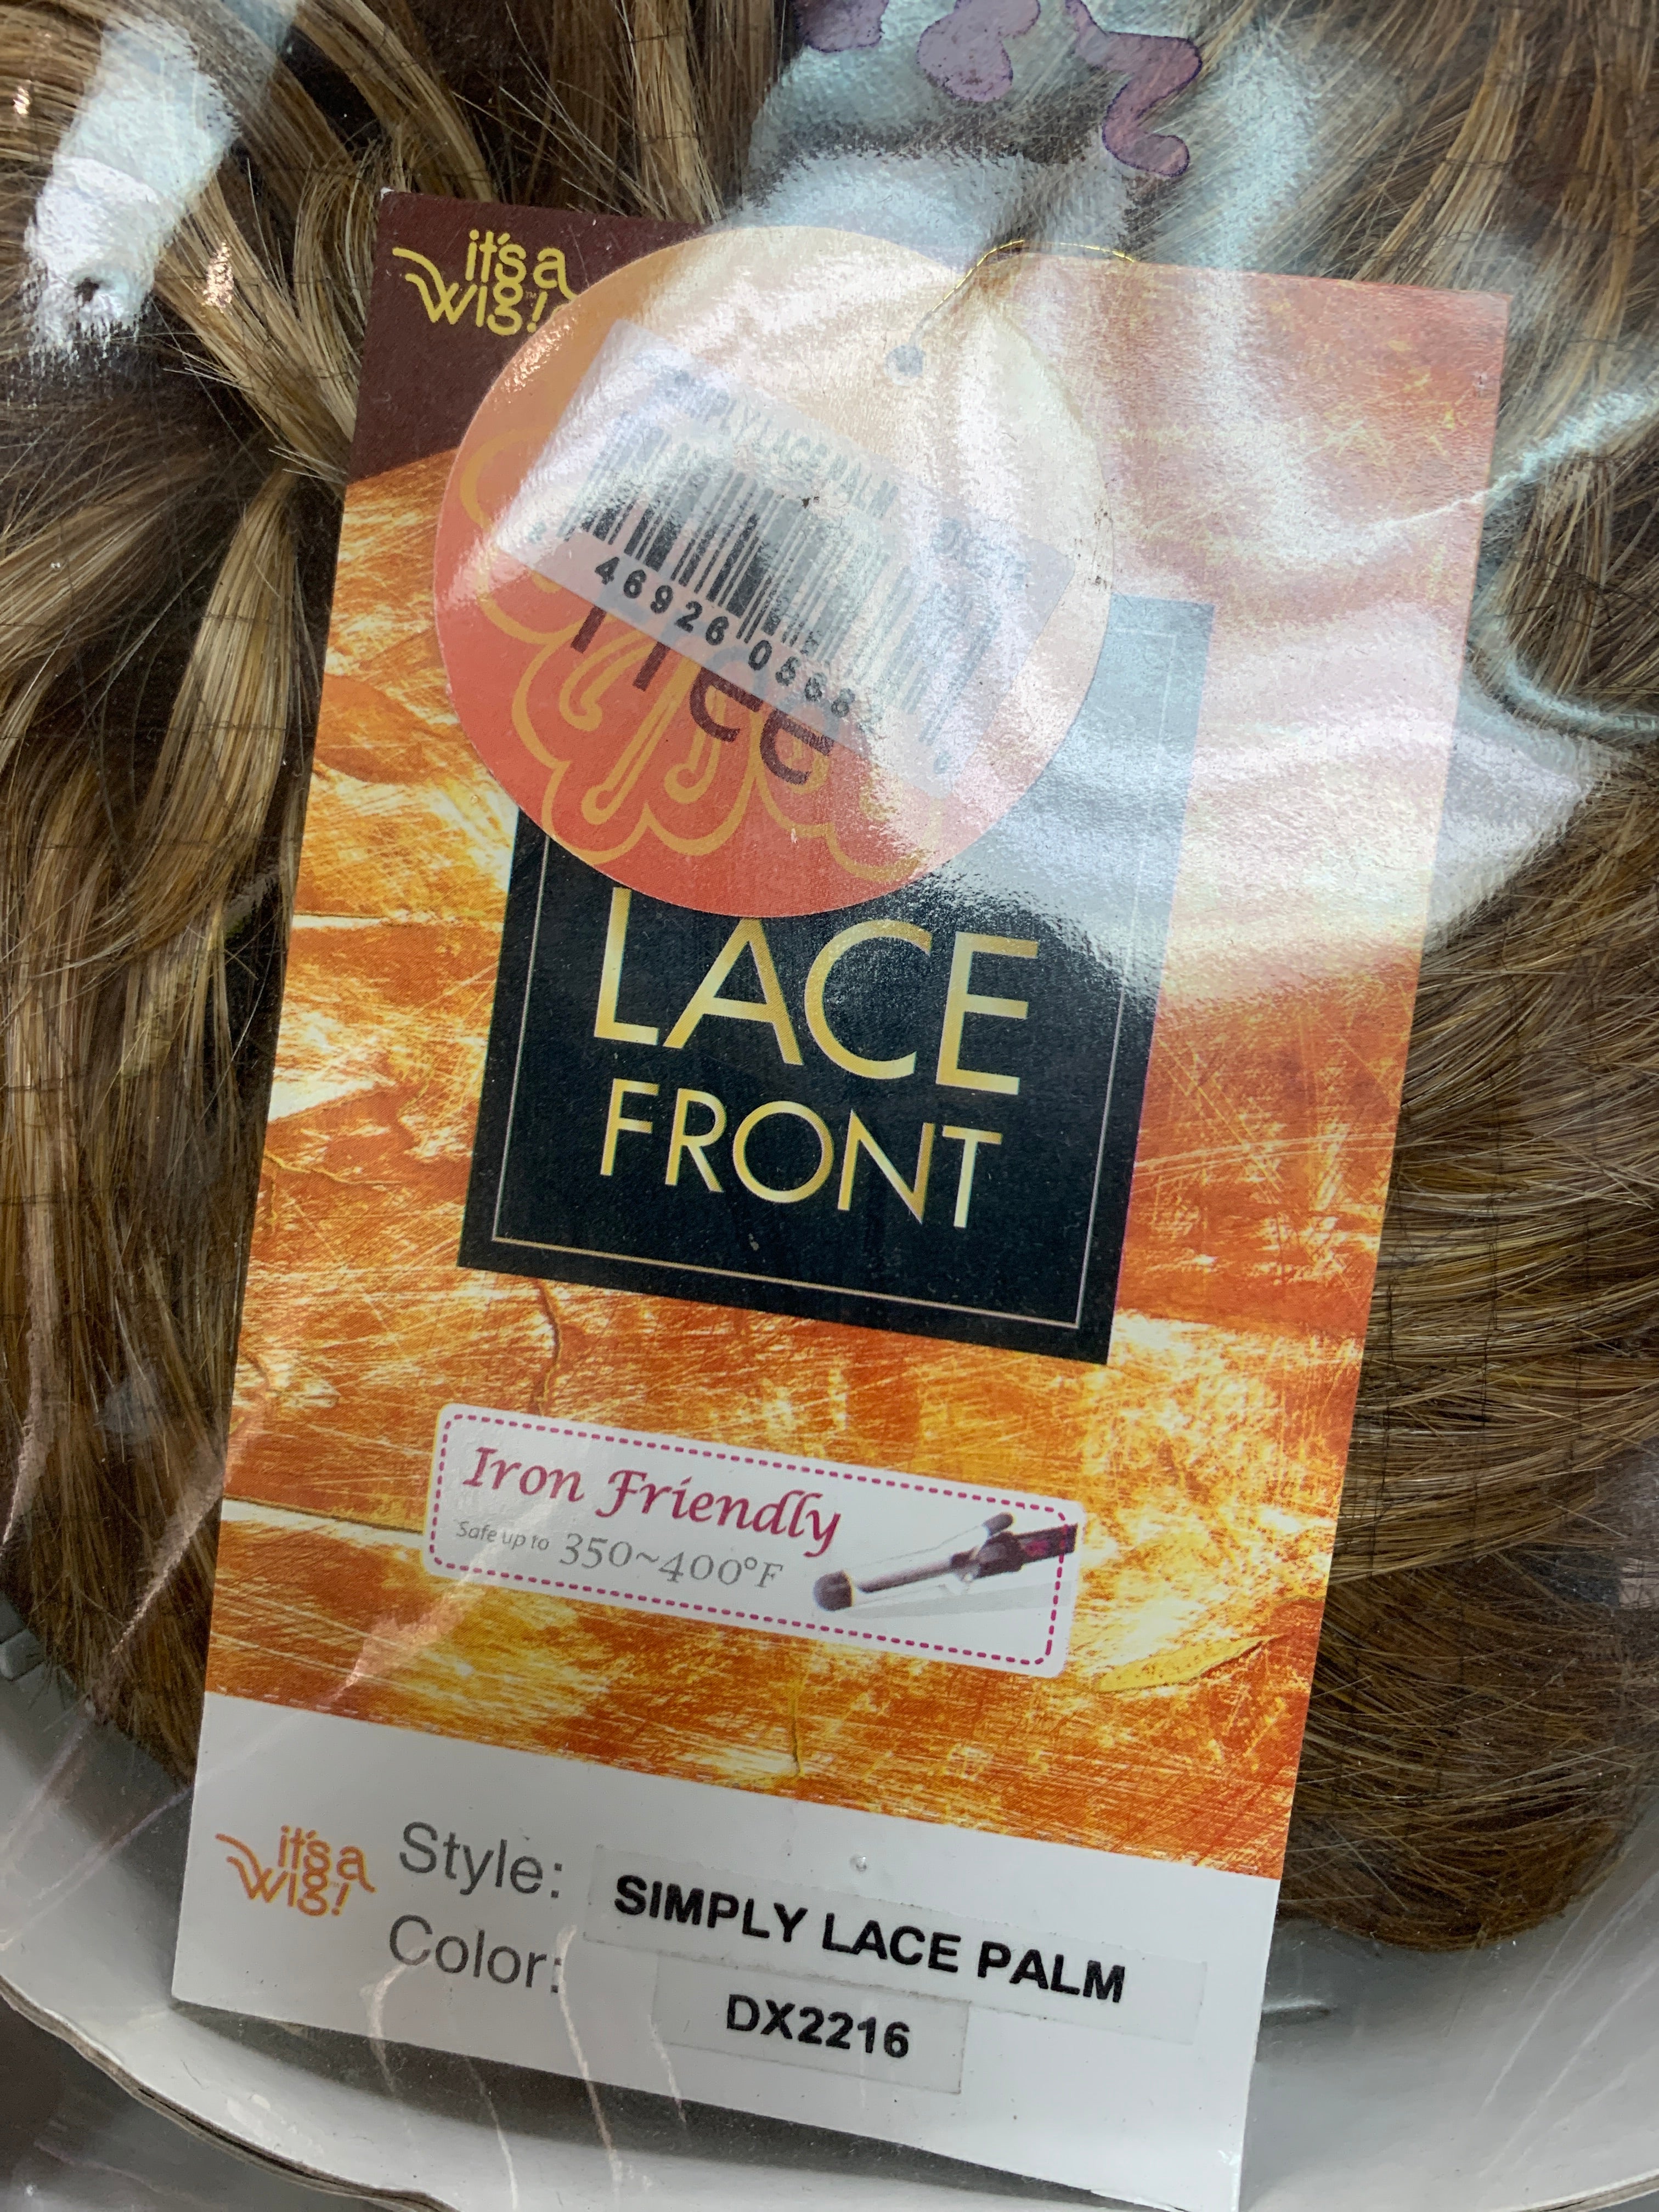 It’s a wig simply lace palm